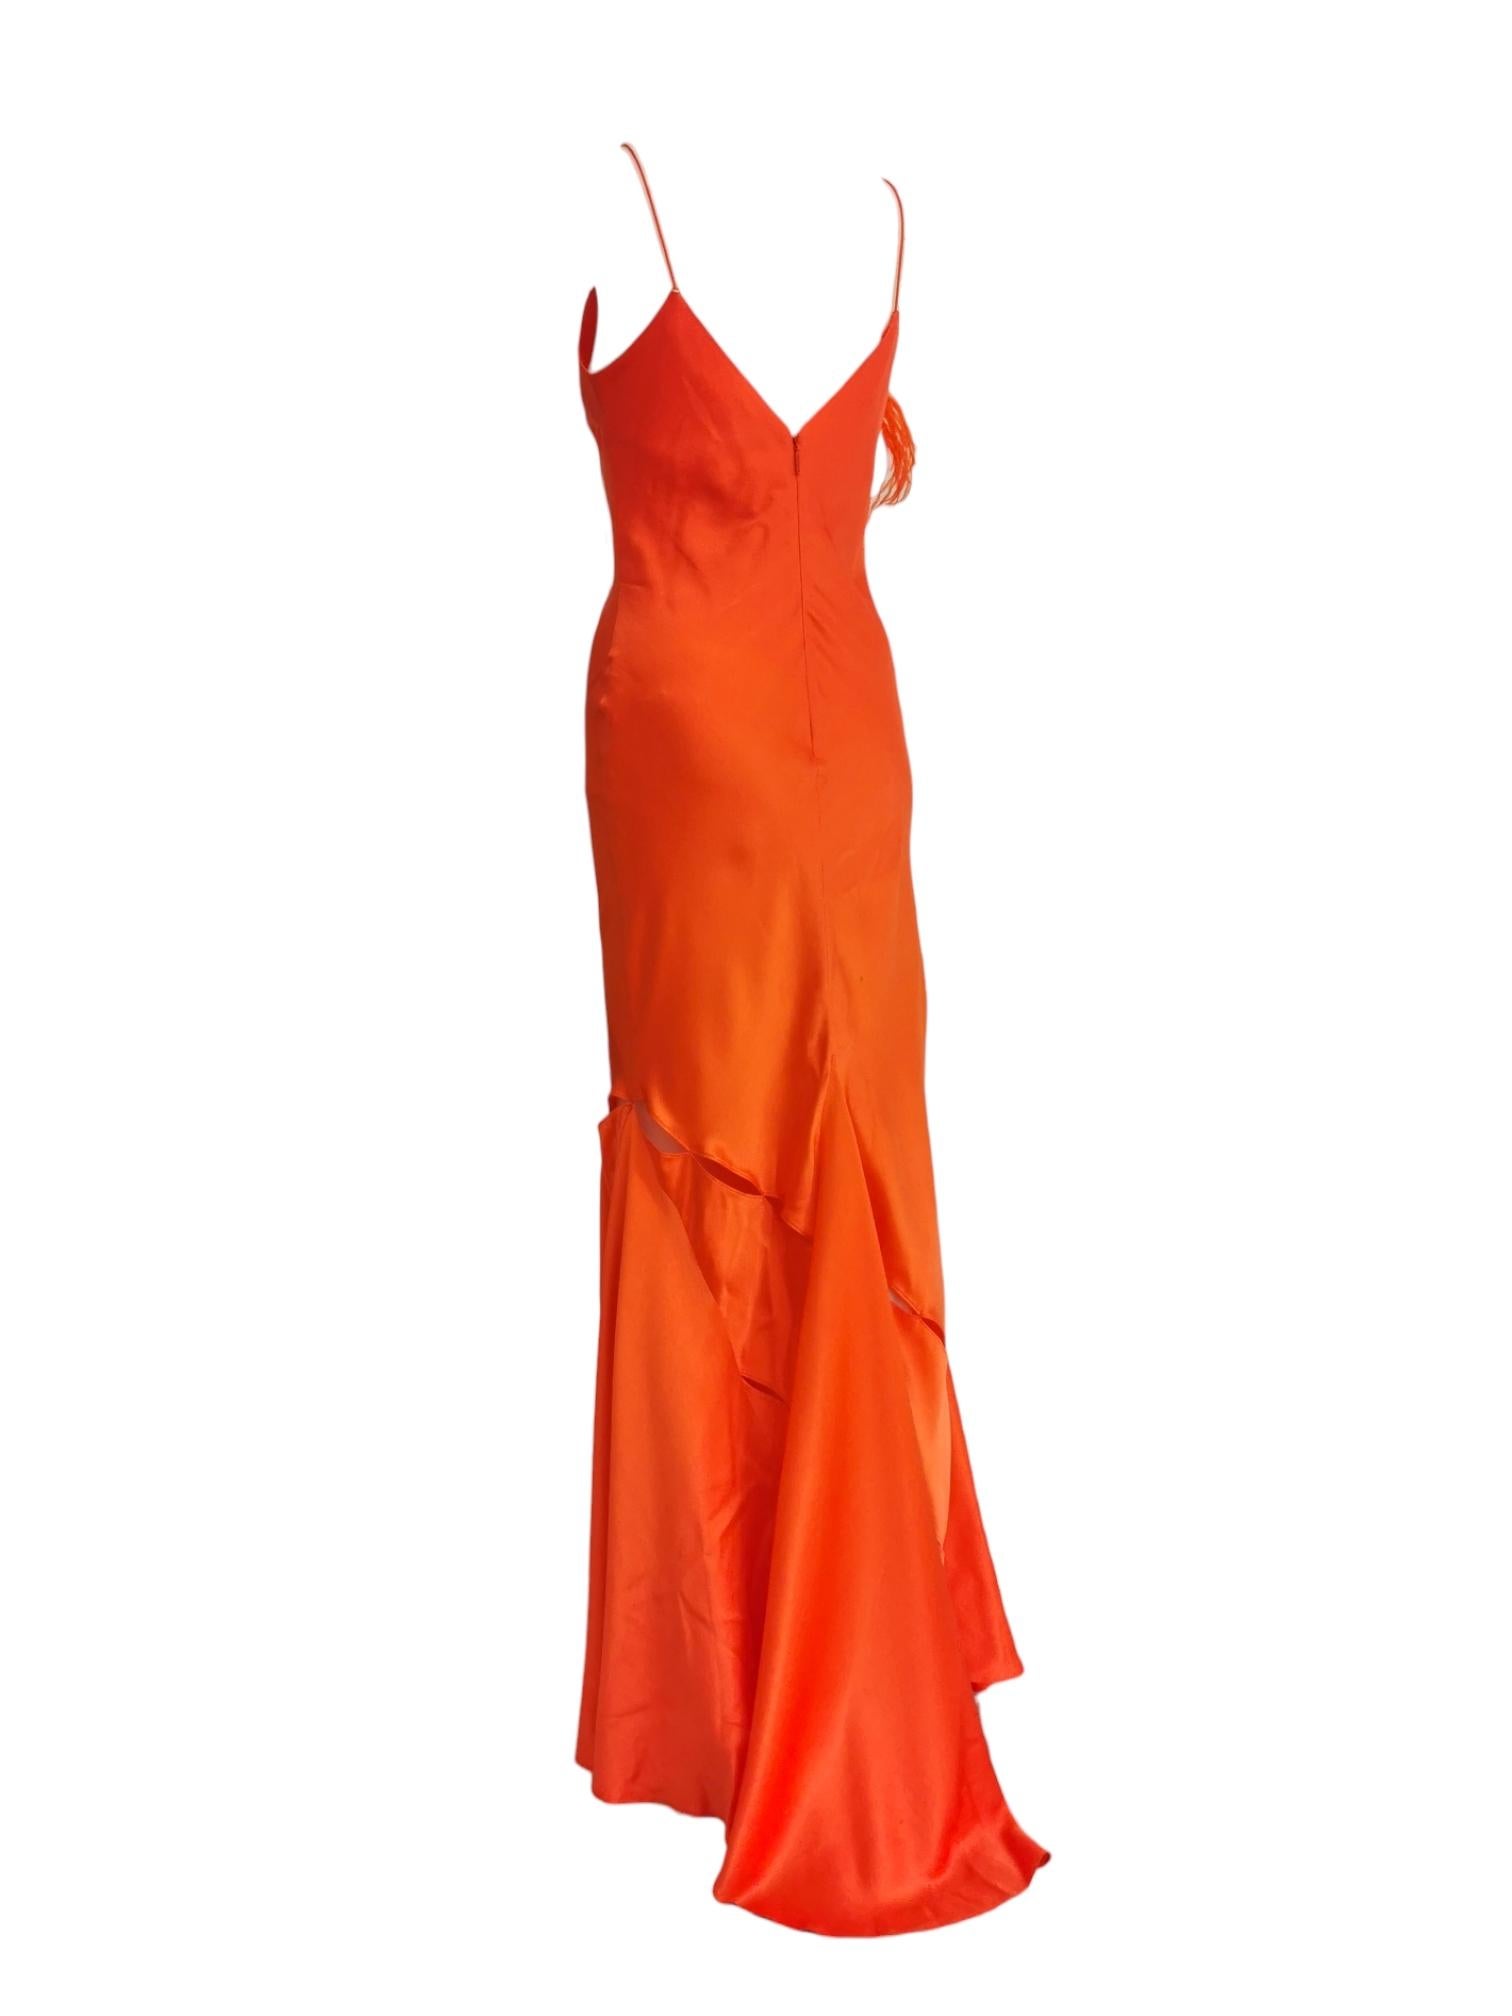 Roberto Cavalli bias cut gown, SS 2004 In Excellent Condition For Sale In London, GB